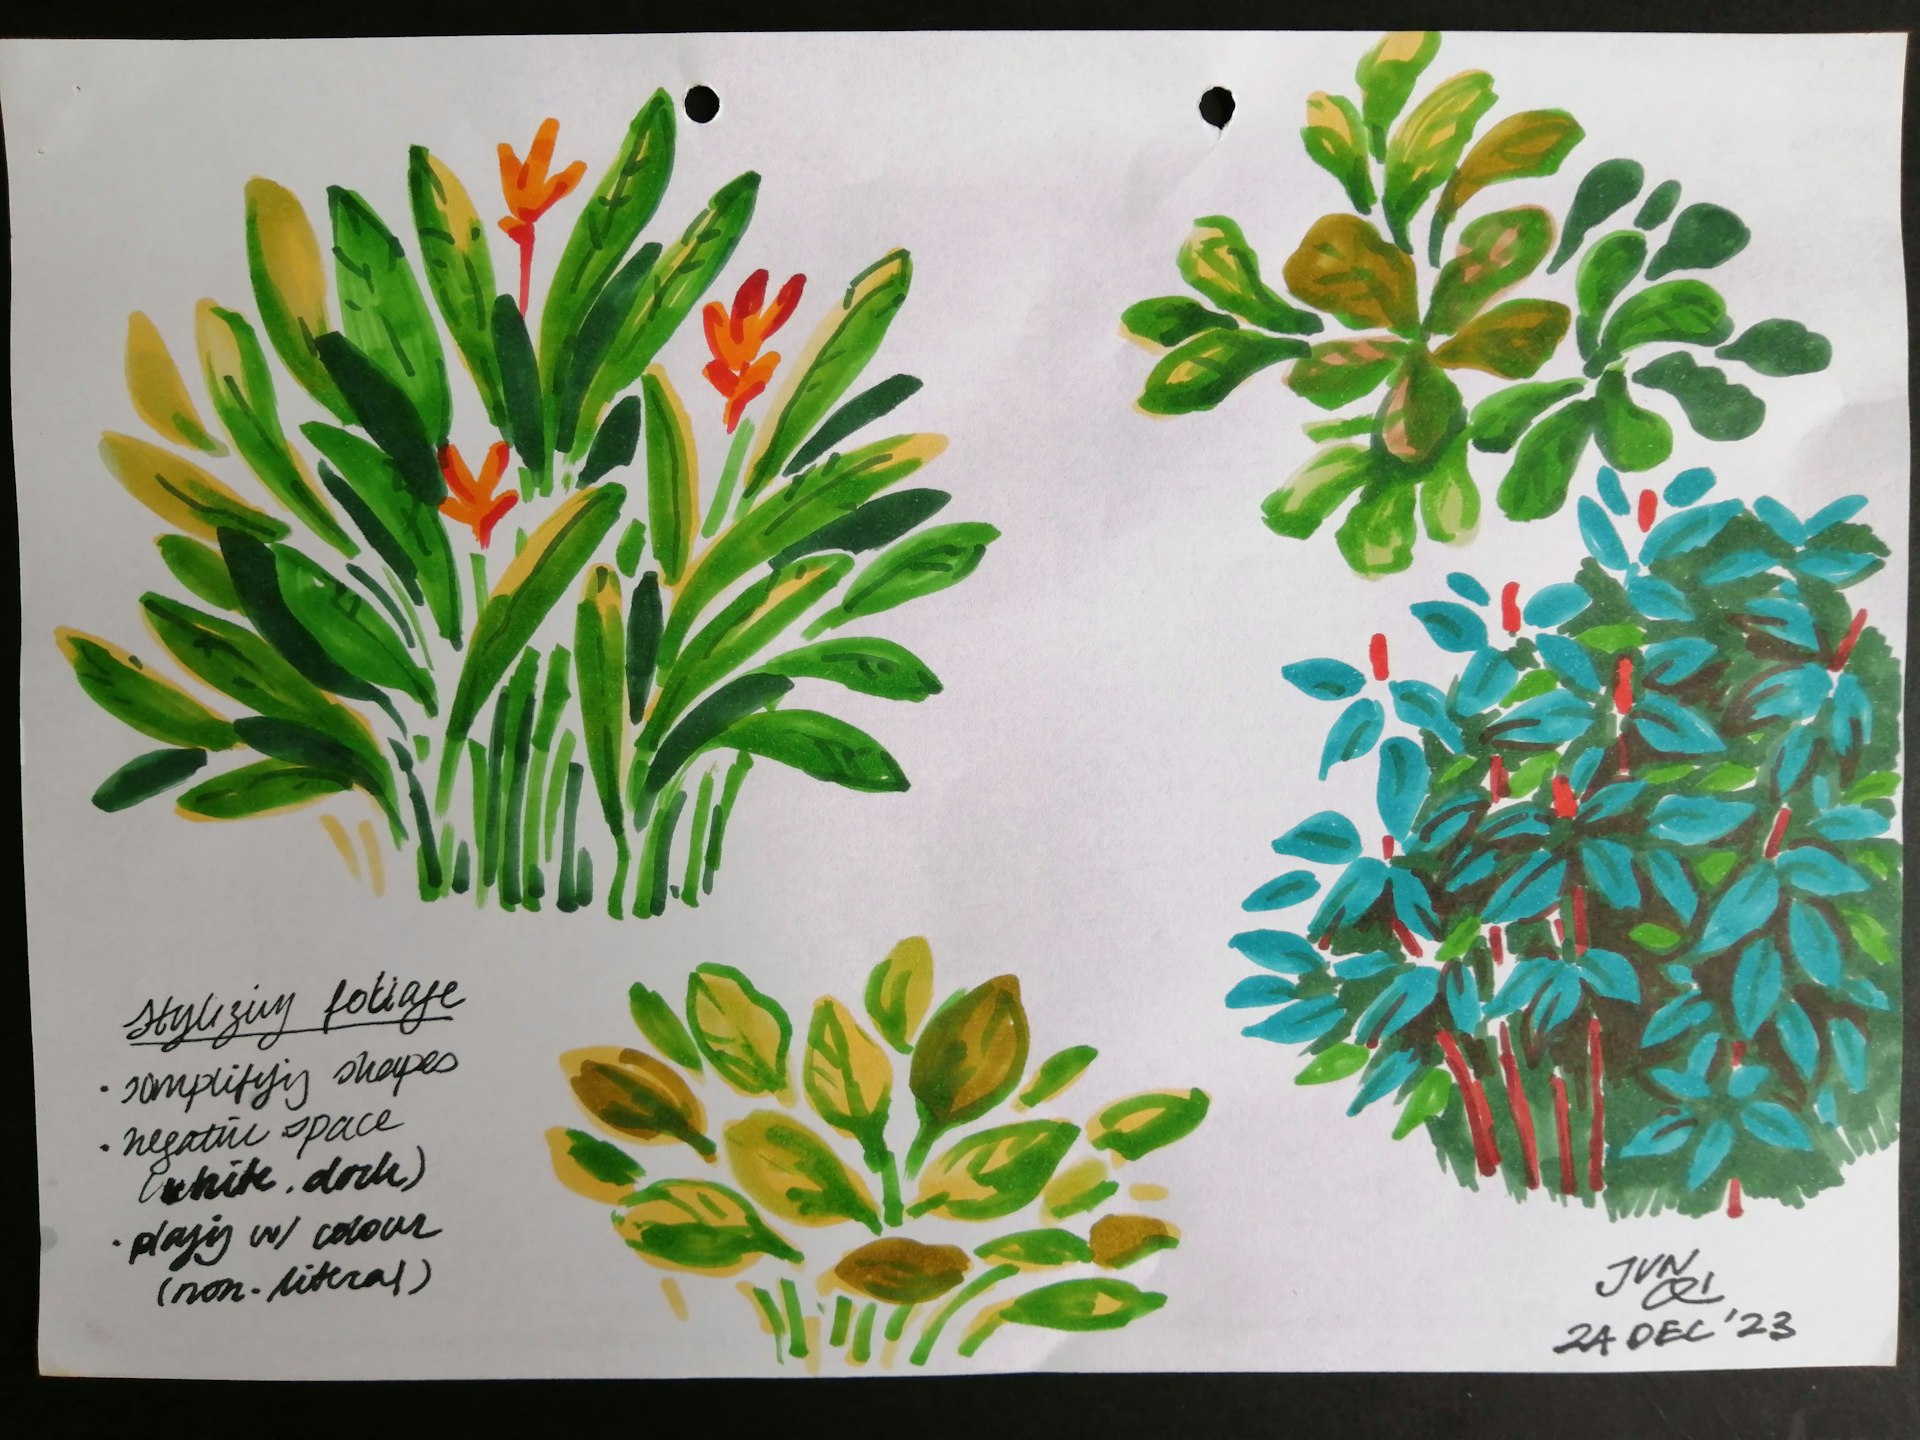 Foliage stylization exercises, sketched from plants in my condo.